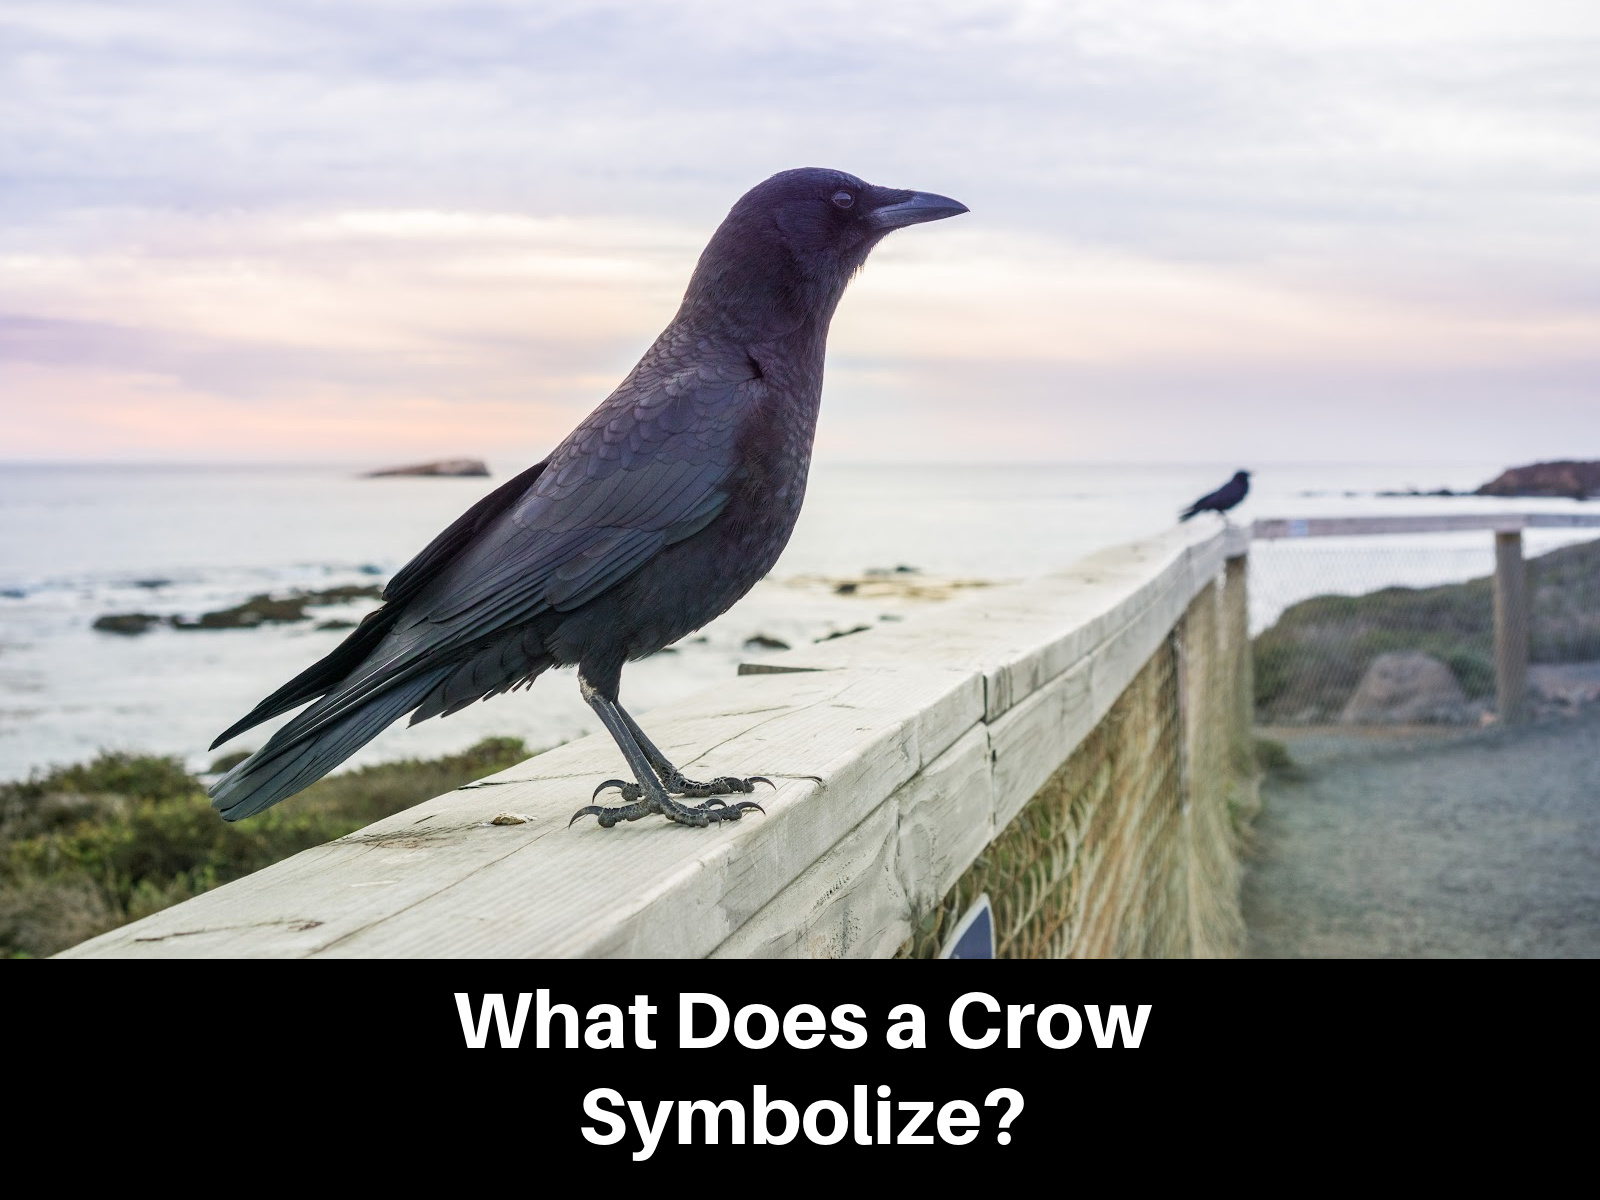 7 Crow Symbolism Meanings in Different Cultures